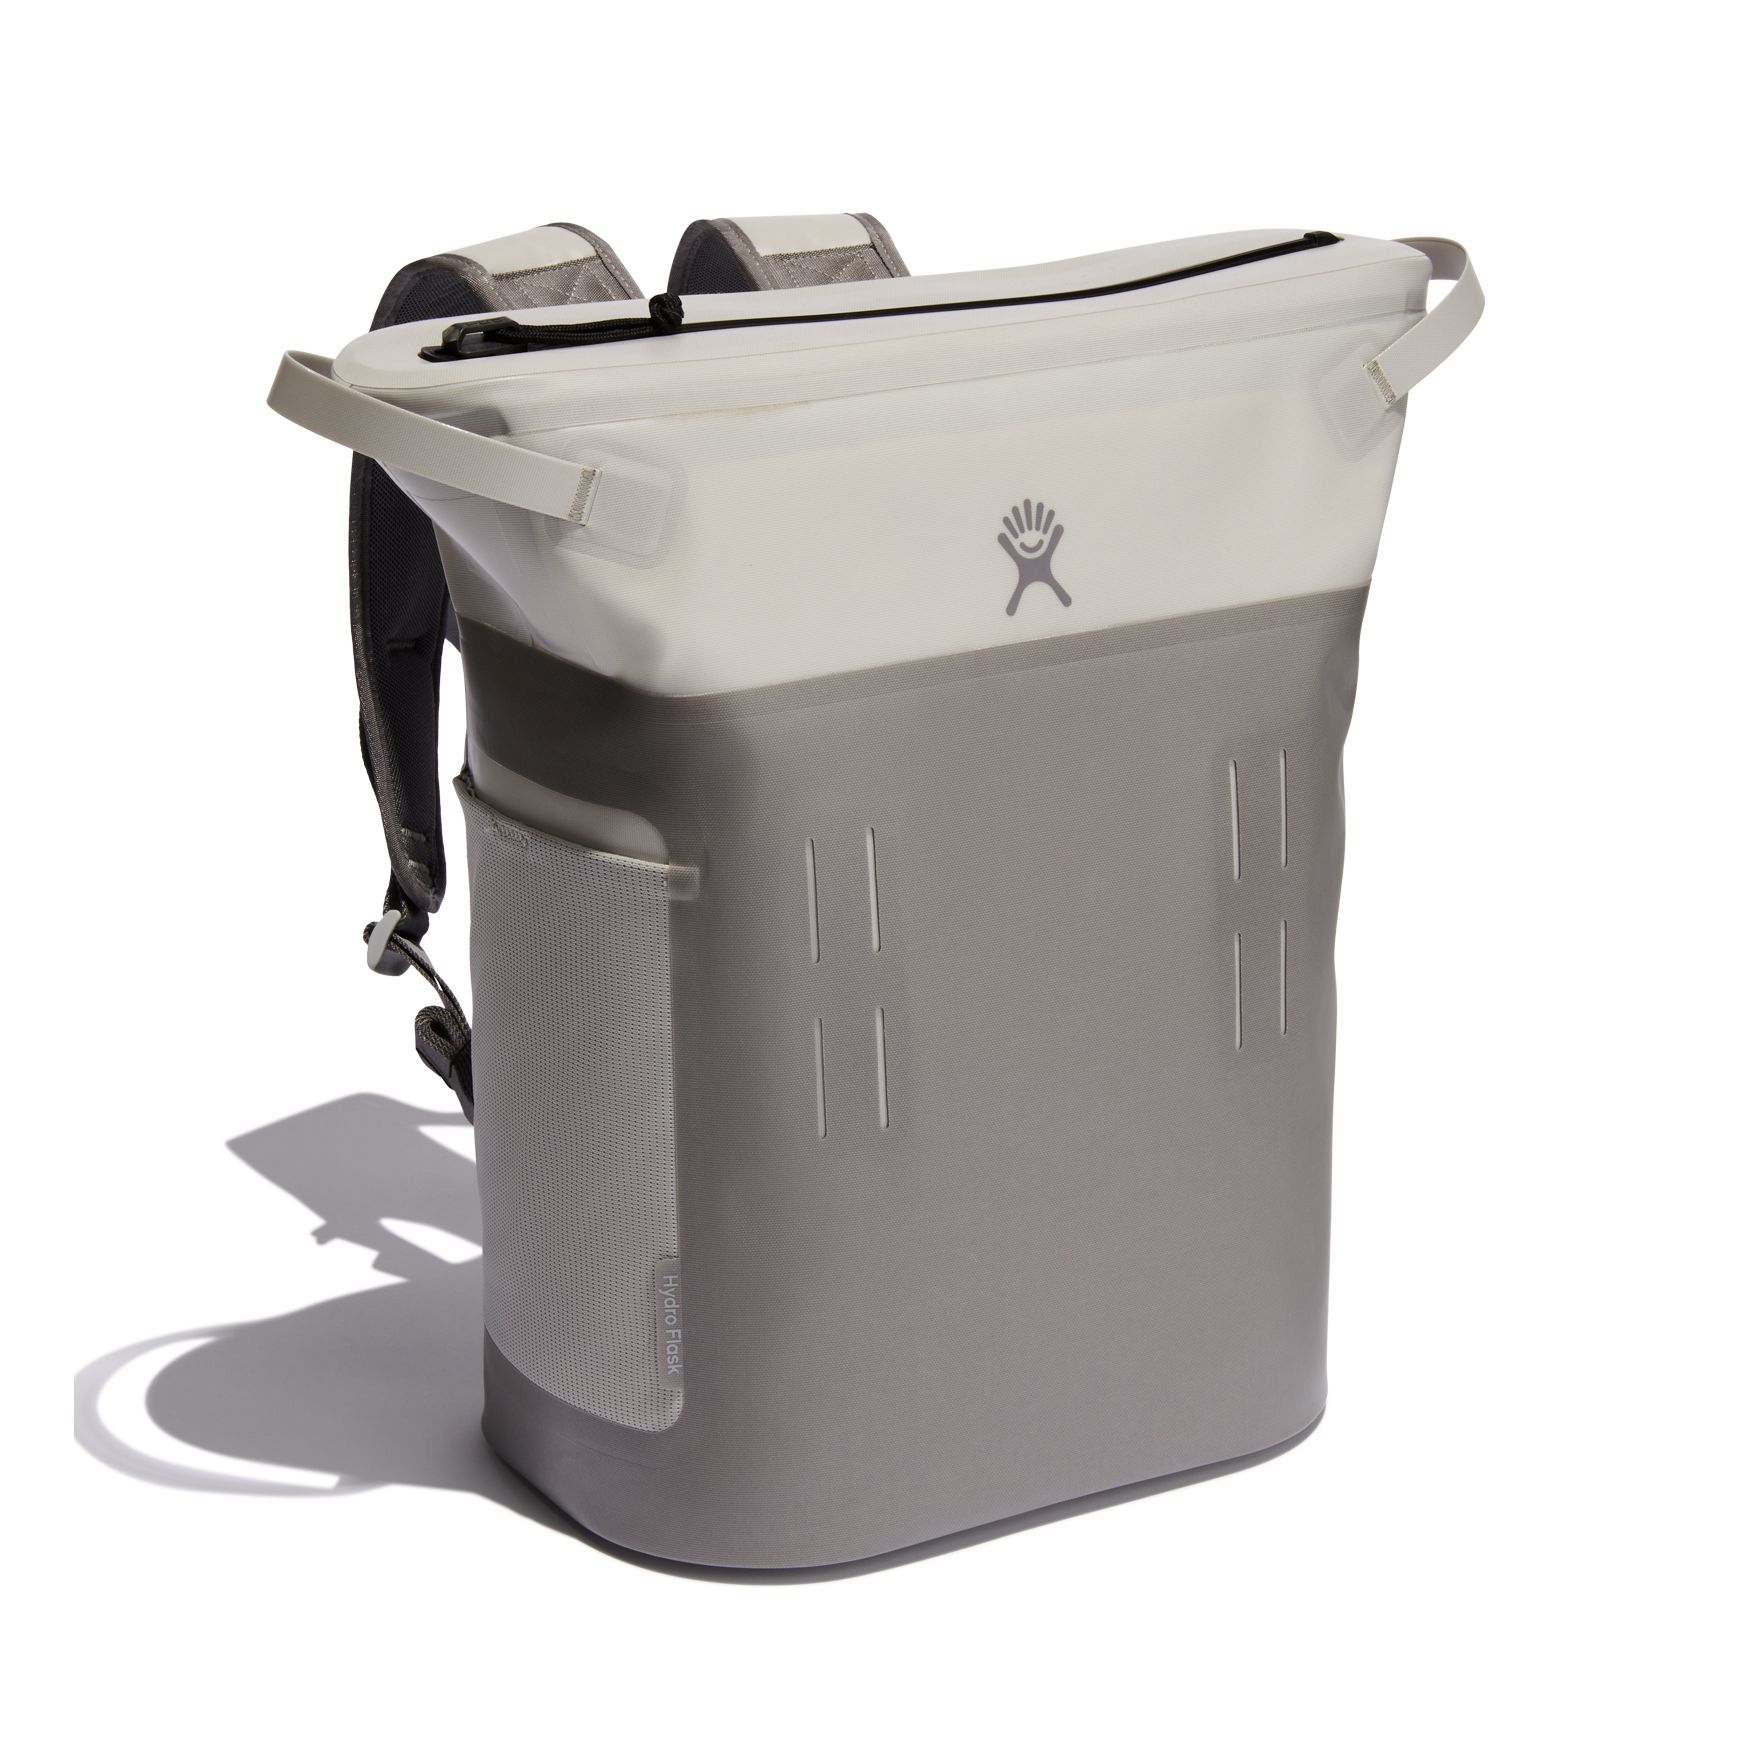  Hydro Flask 12L Carry Out Soft Cooler - Insulated